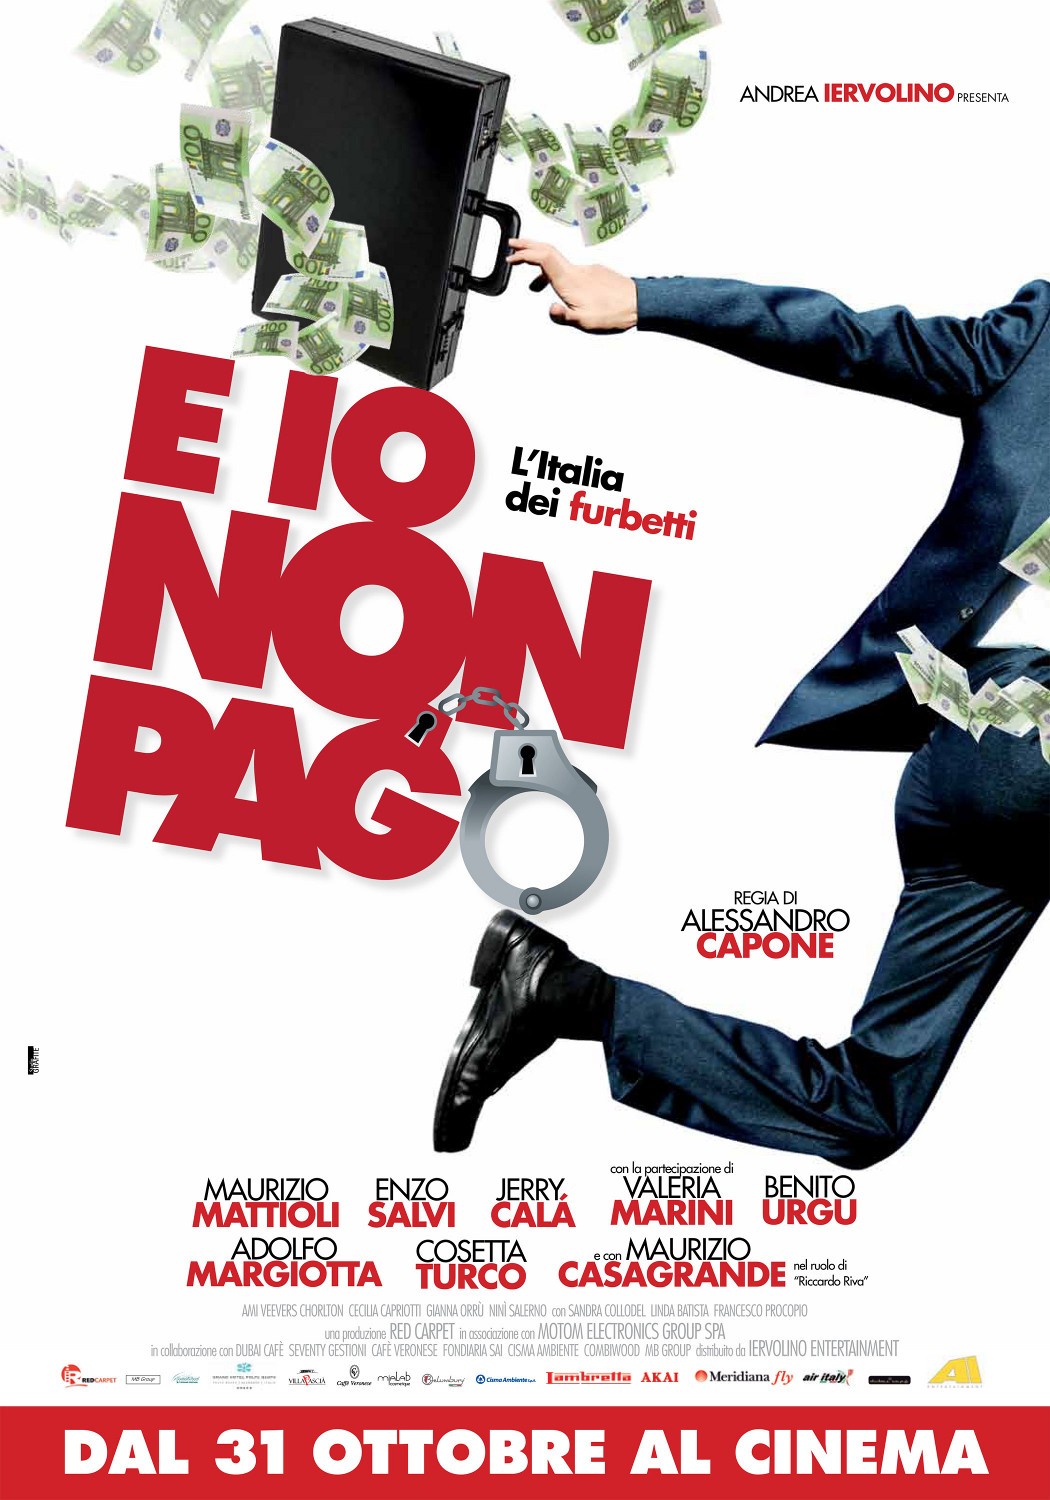 Extra Large Movie Poster Image for E io non pago 